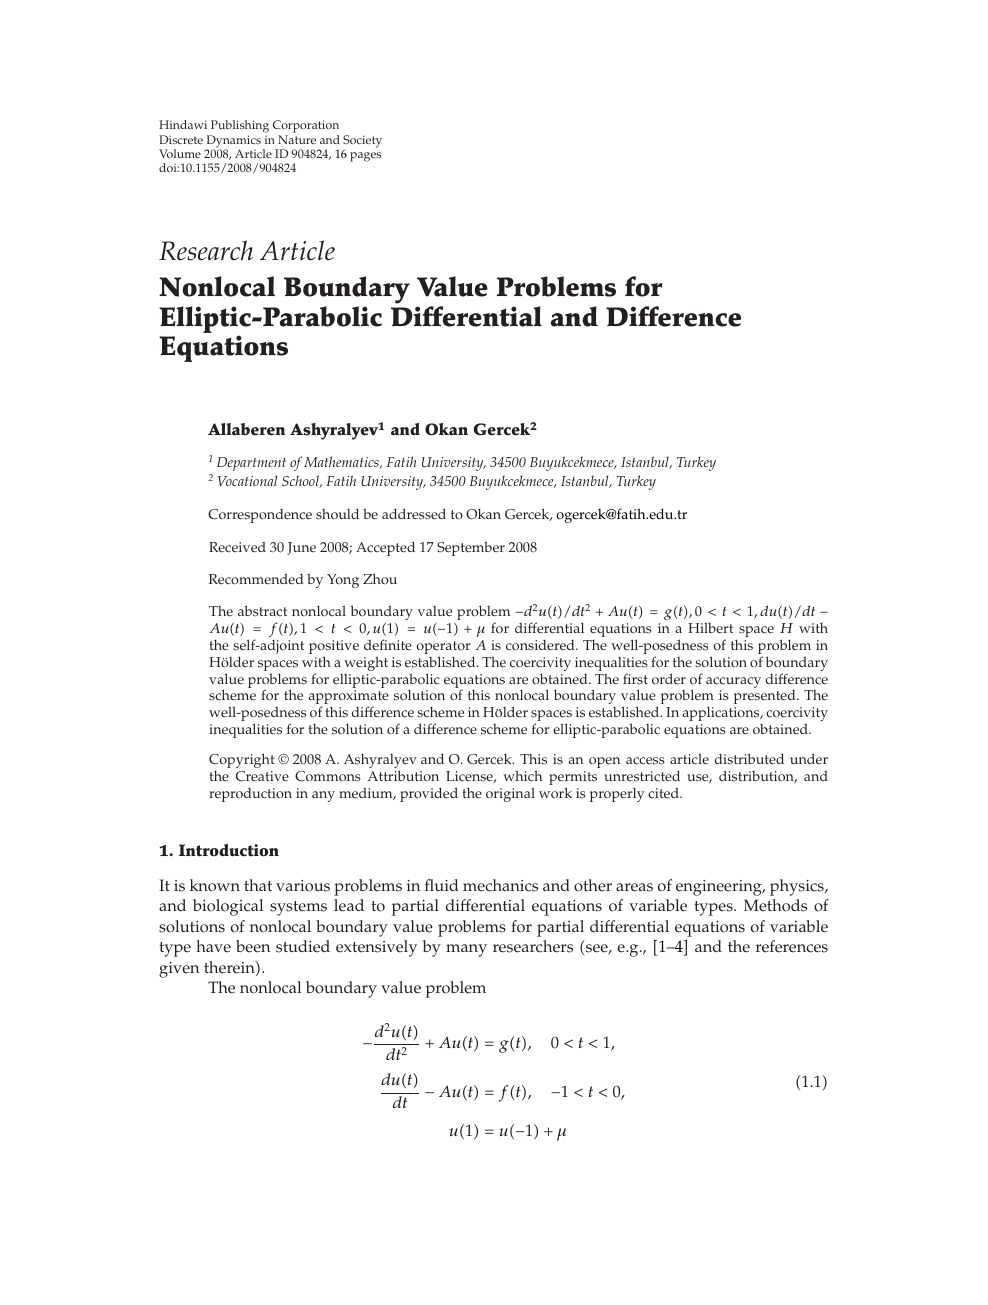 Nonlocal Boundary Value Problems For Elliptic Parabolic Differential And Difference Equations Topic Of Research Paper In Mathematics Download Scholarly Article Pdf And Read For Free On Cyberleninka Open Science Hub